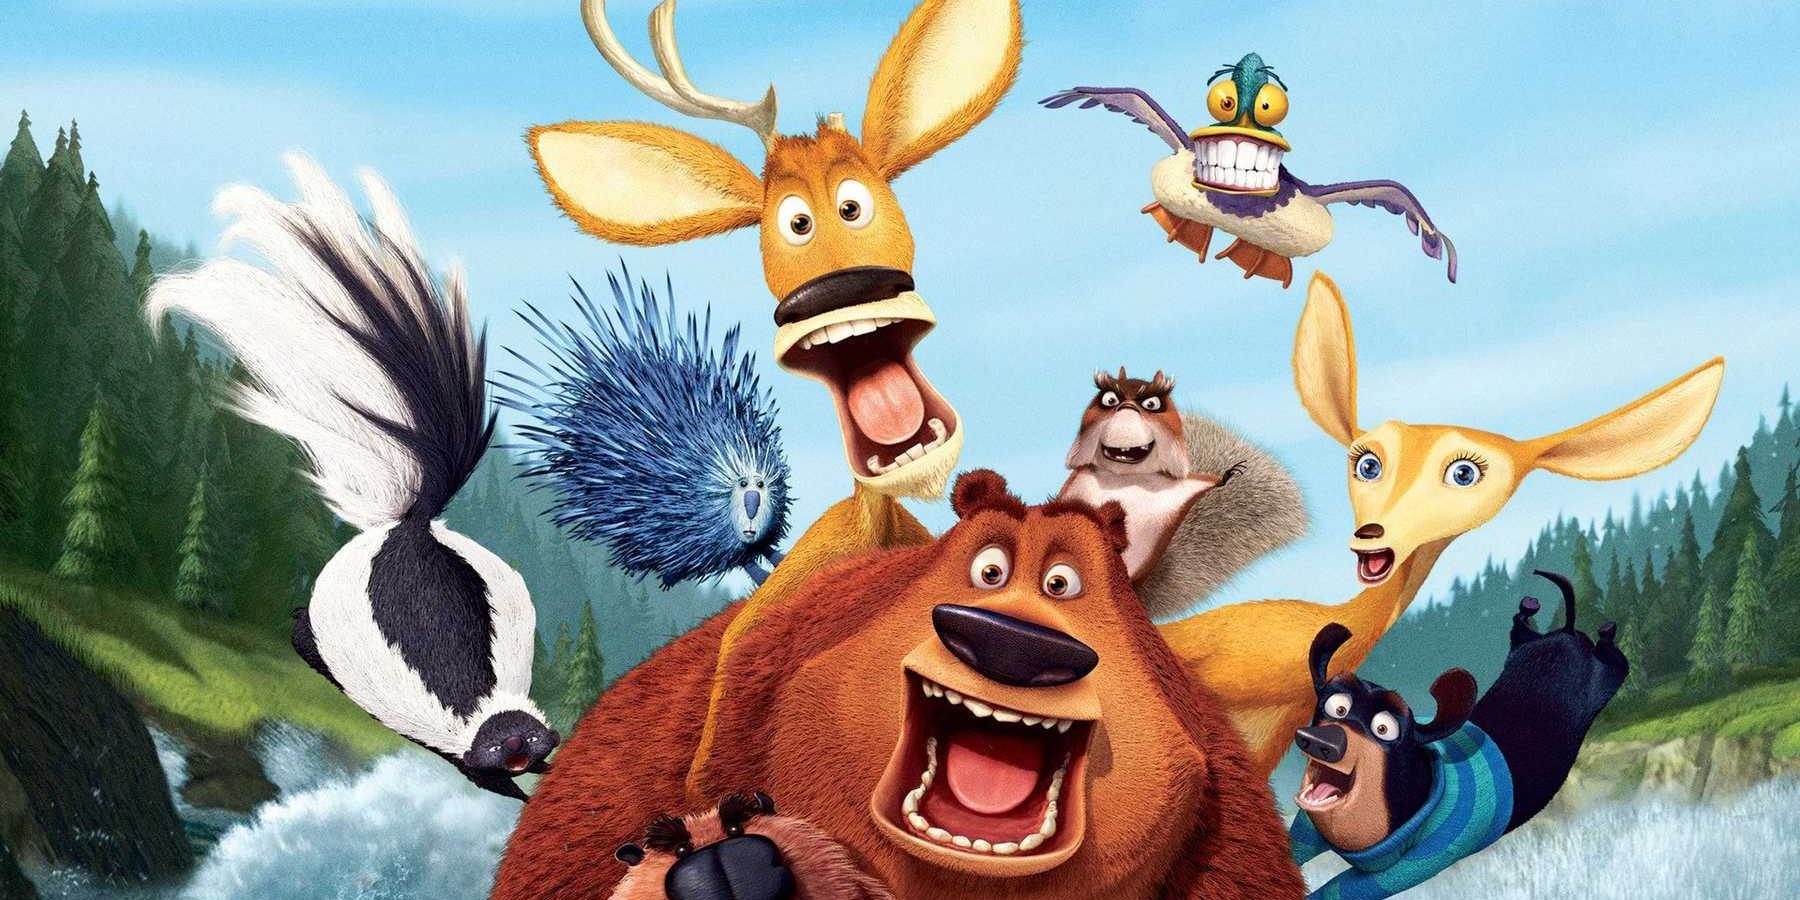 Sony Pictures Animation: The 10 Worst Movies Of All Time (According To IMDb)